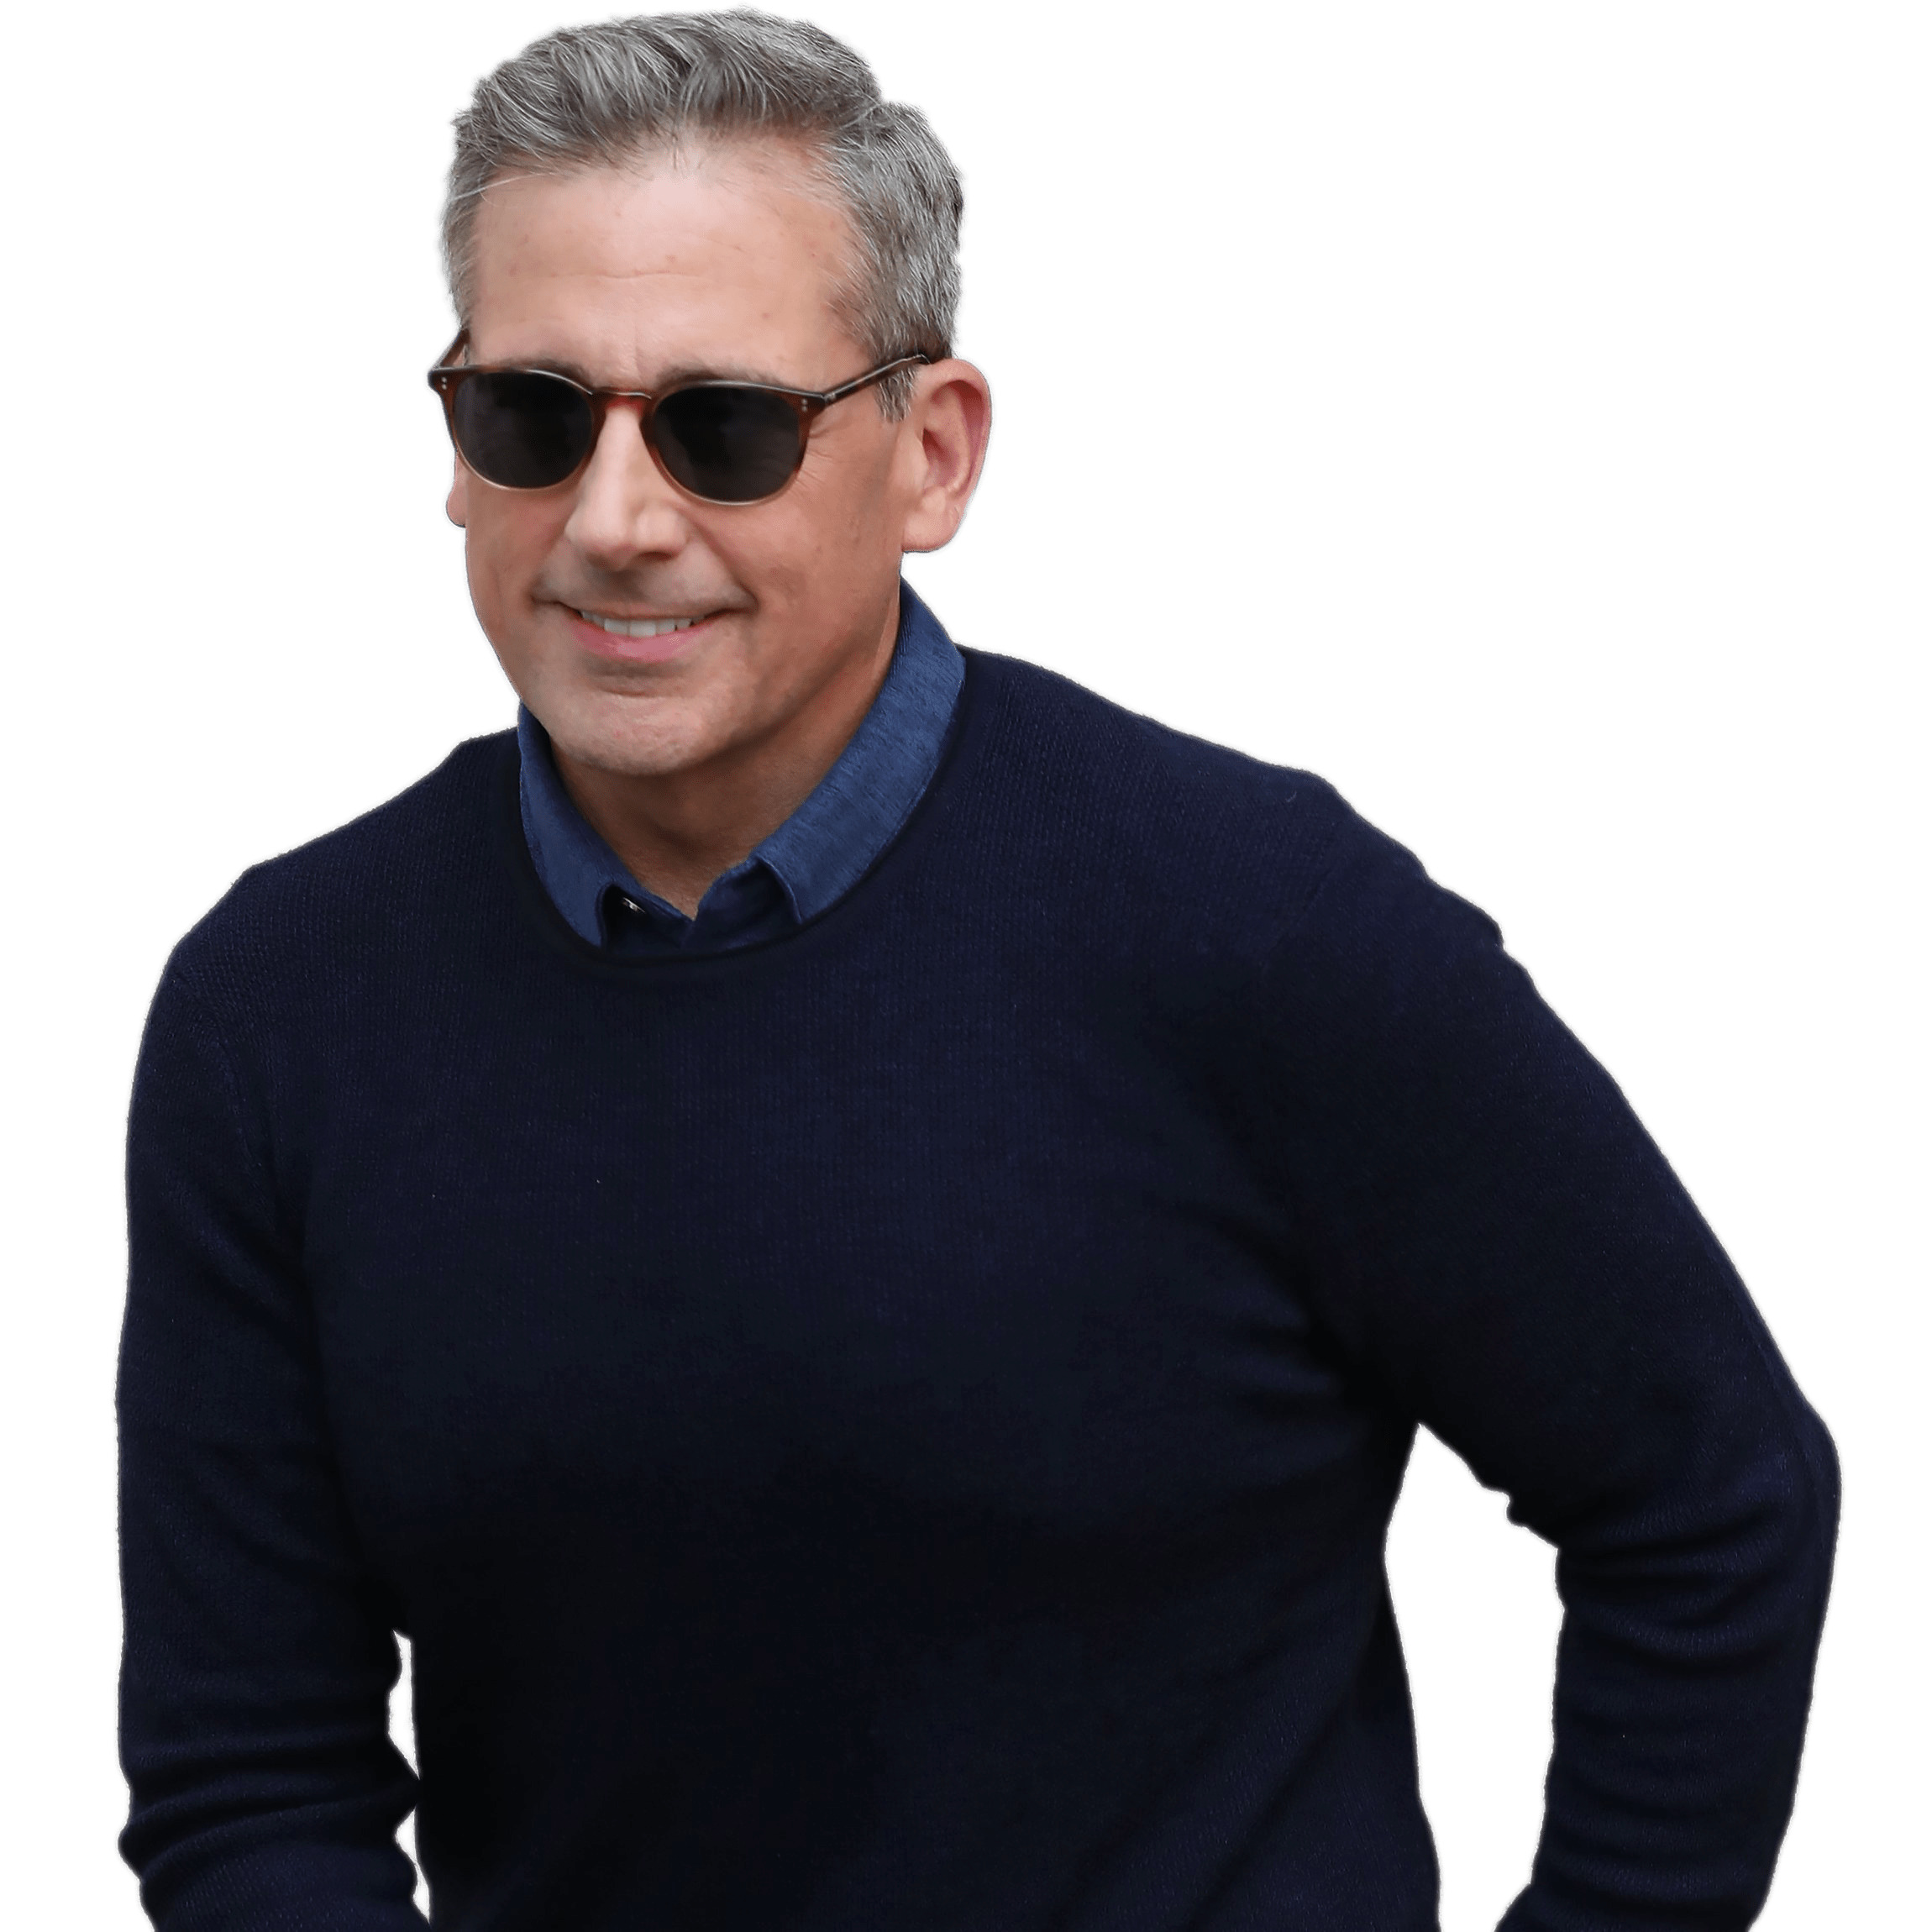 Steve Carell With Sunglasses png icons